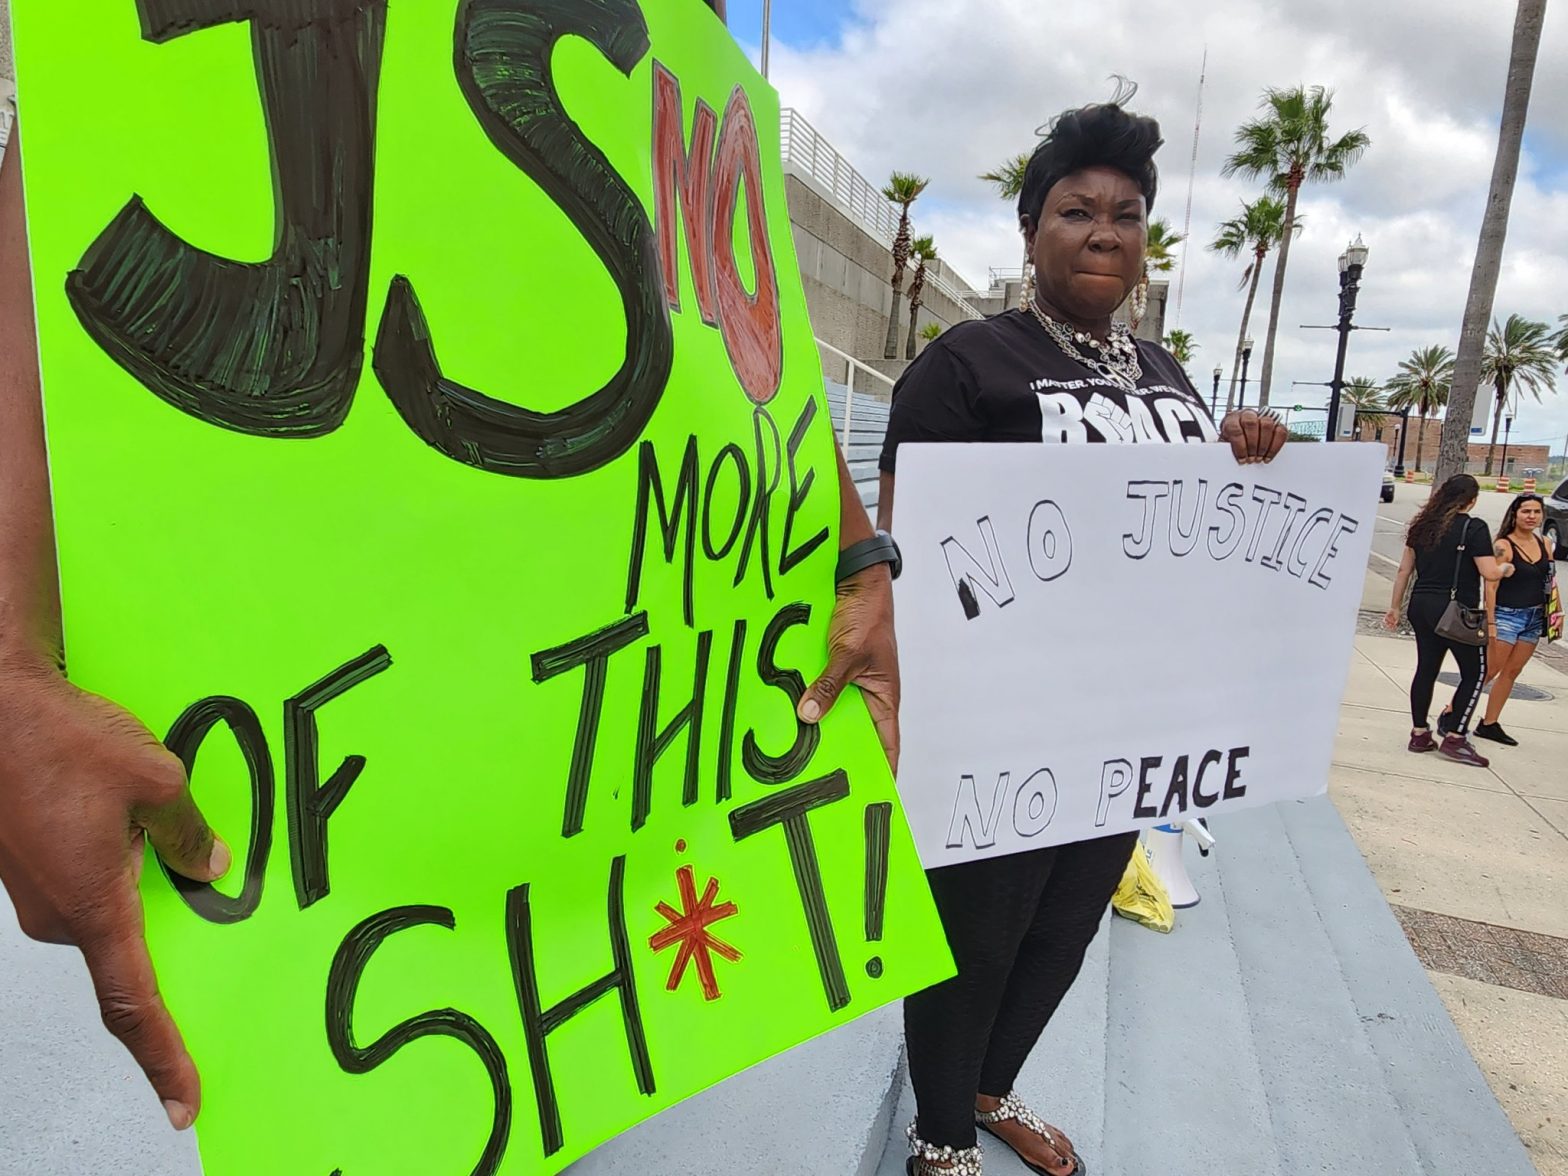 Who is Le’Keian Woods? Jacksonville residents protest against police torture and arrest of 24-year-old | Watch video